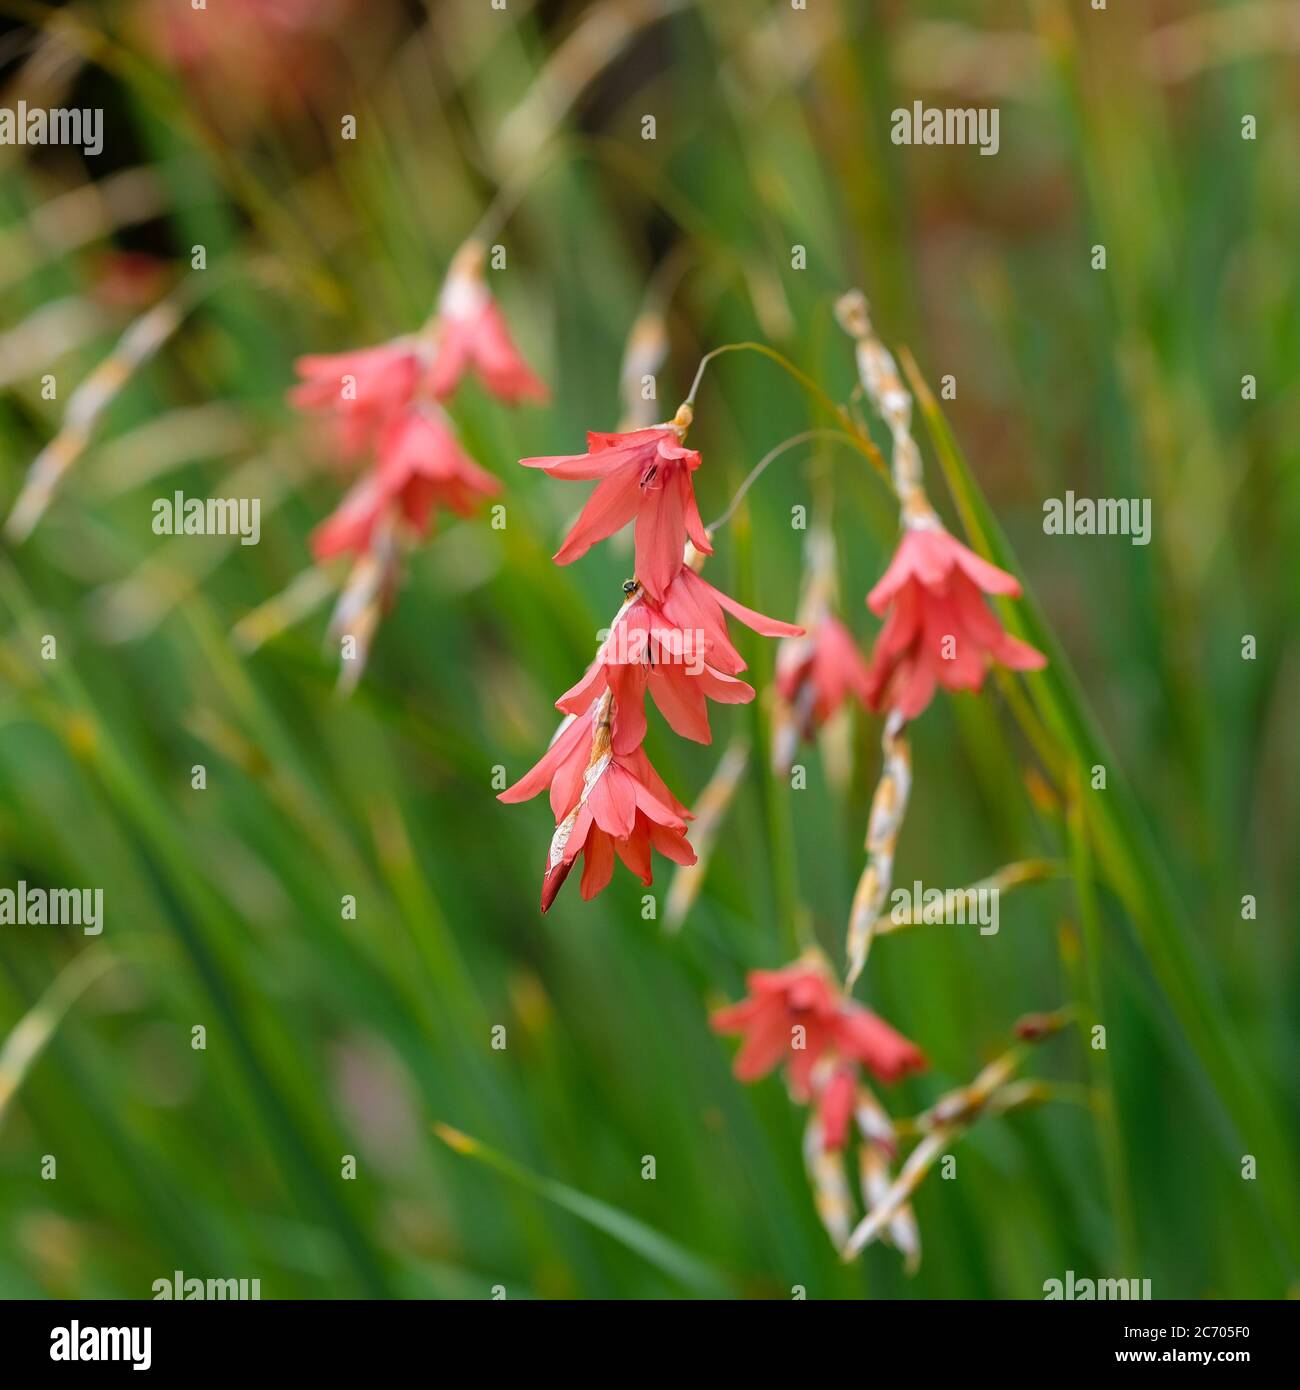 Dierama flowers are also known as hairbells, angels fishing rod, fairybells, and wandflowers. Stock Photo